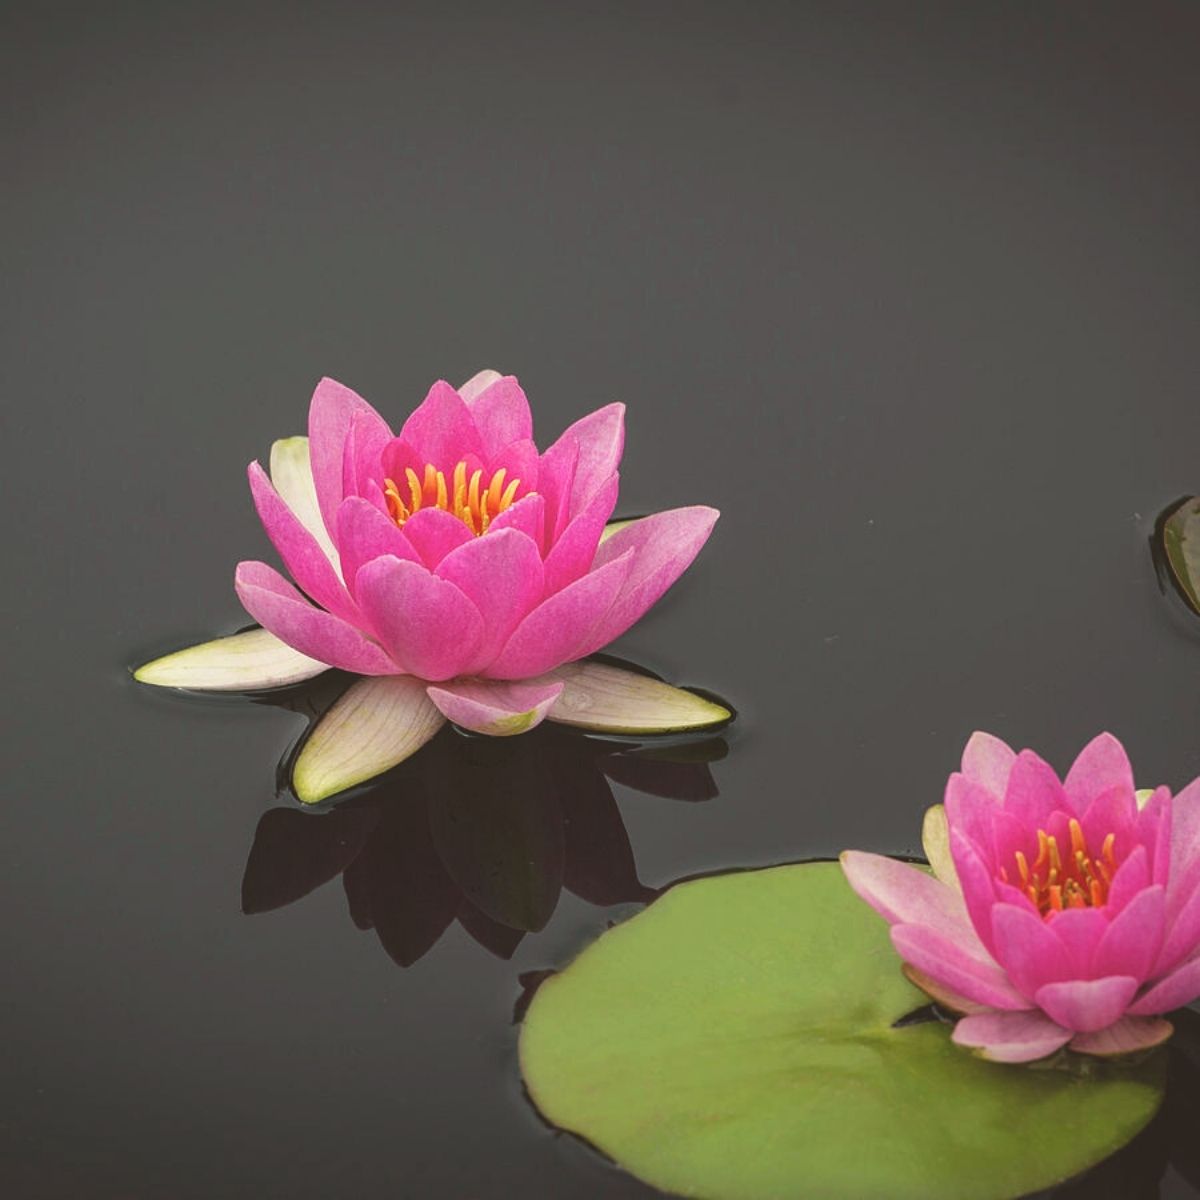 lotus-flower-the-special-meaning-symbolism-and-influence-over-the-years-featured